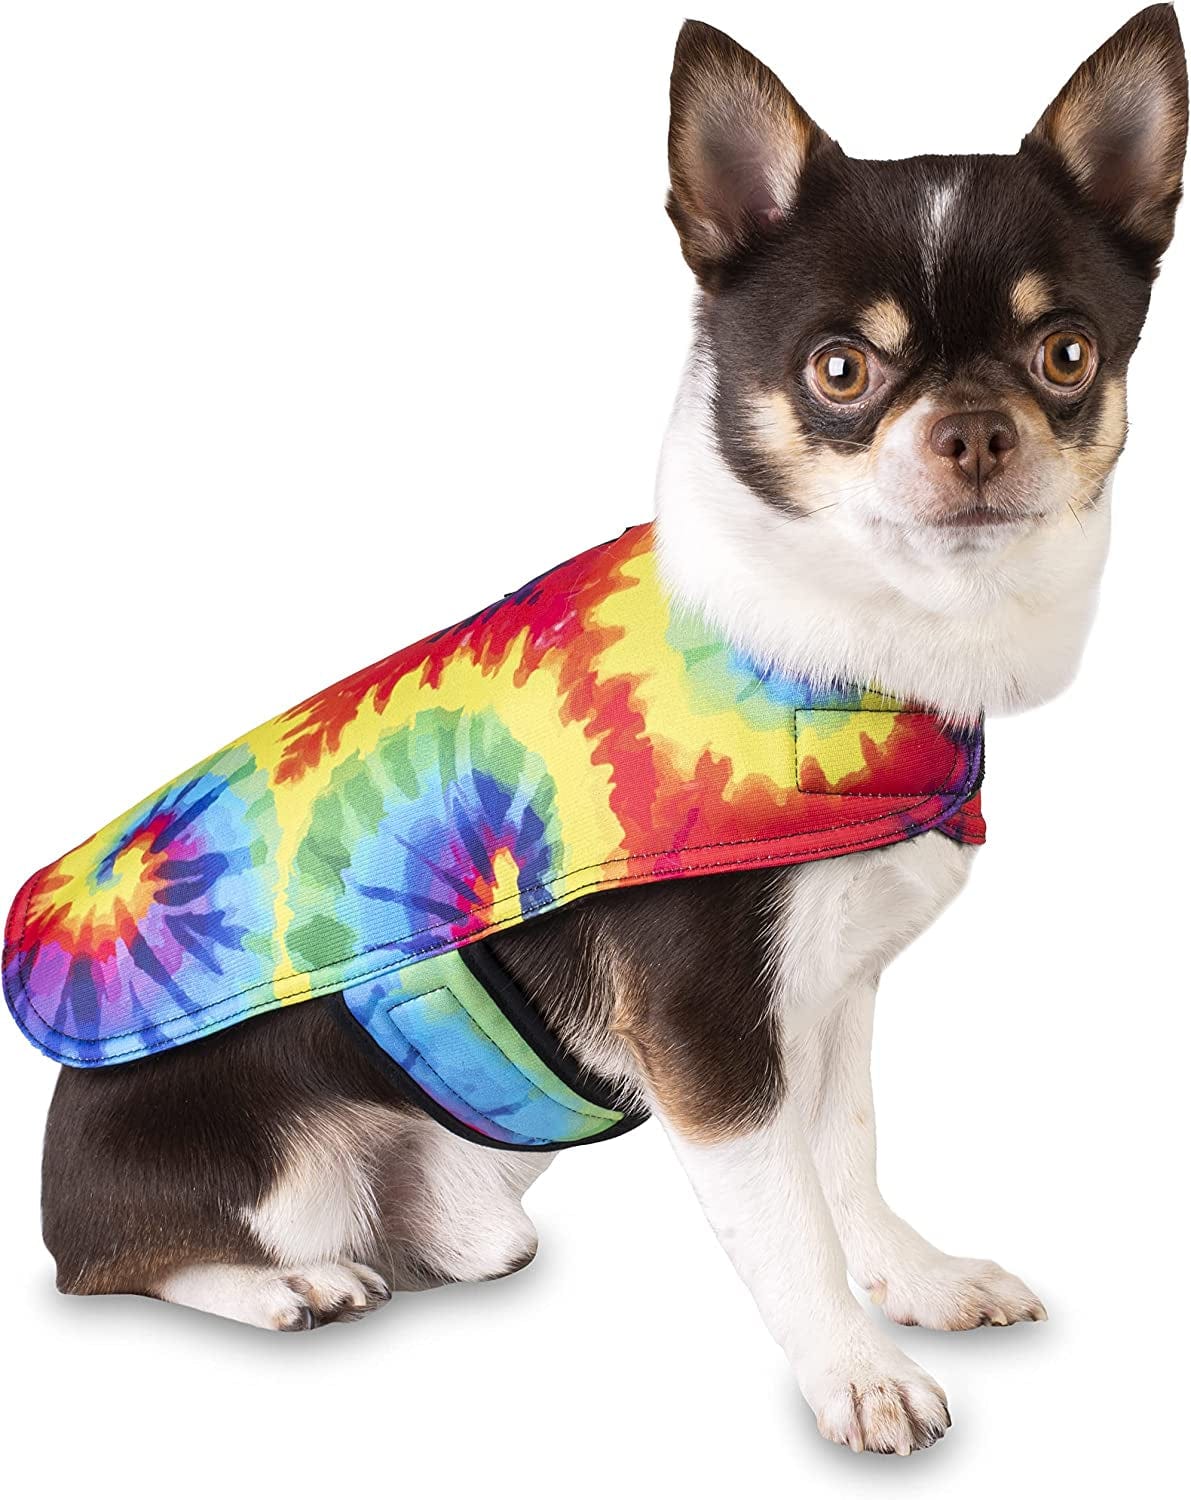 Dog Clothes - Handmade Dog Poncho - Cinco De Mayo Chihuahua Costume from Authentic Mexican Blanket (Blue, XXS) Animals & Pet Supplies > Pet Supplies > Dog Supplies > Dog Apparel Baja Ponchos Tie-Dye XX-Small 